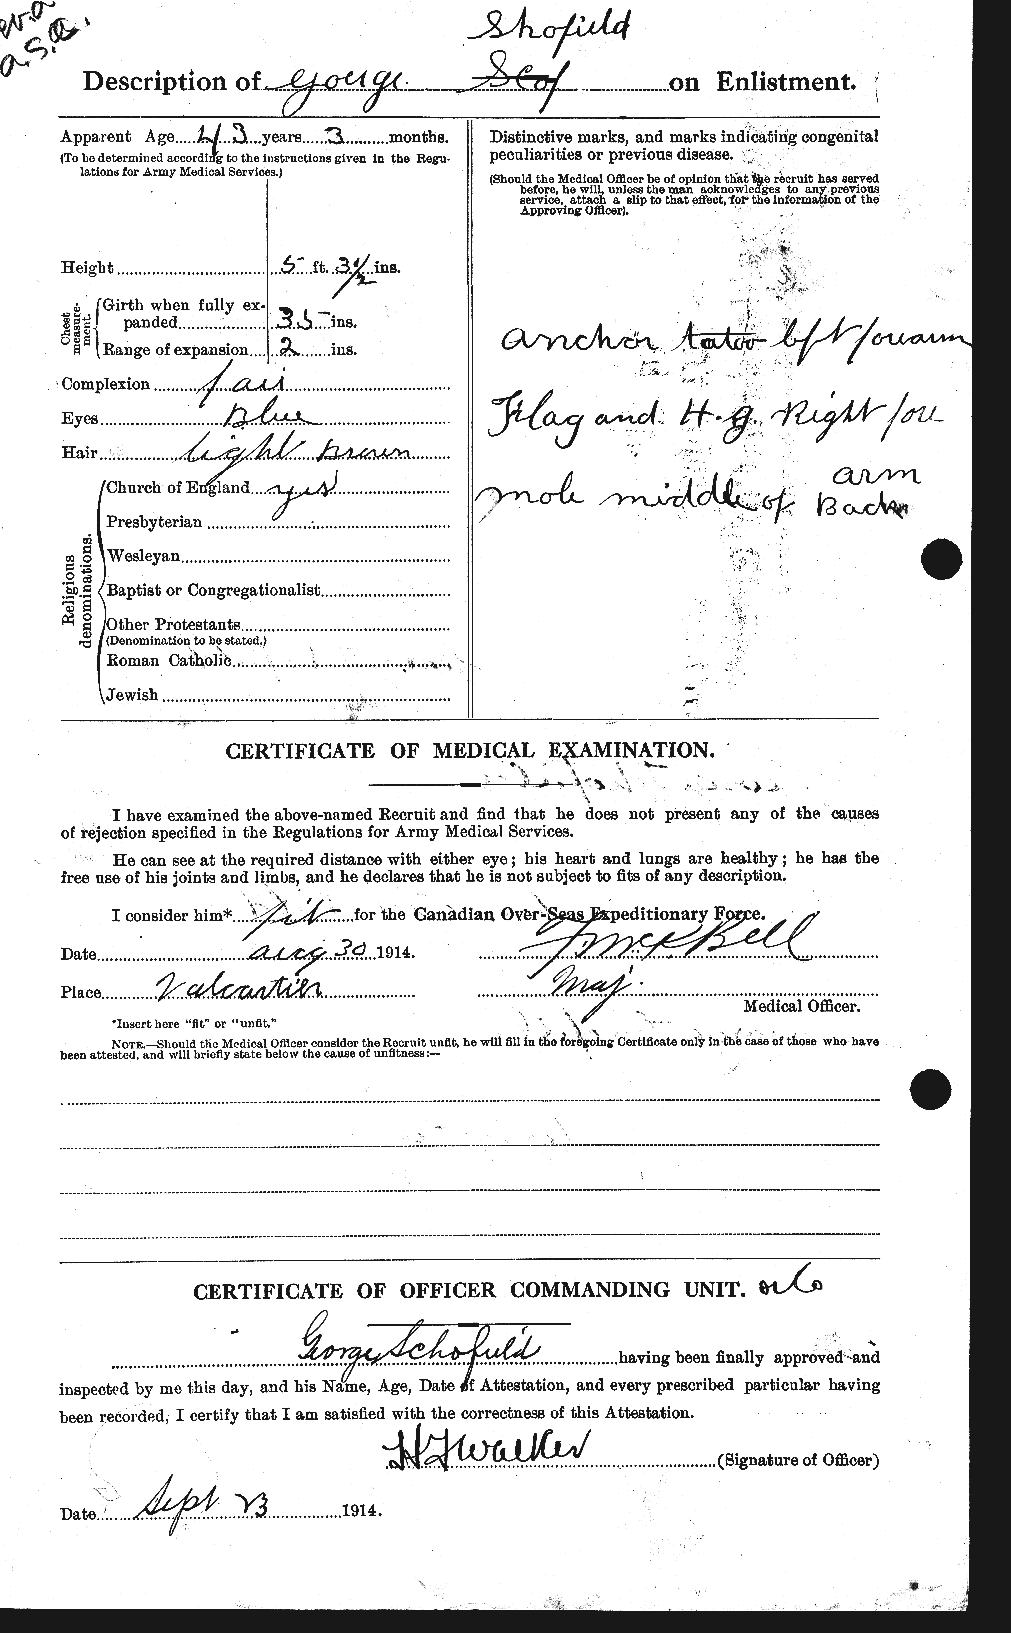 Personnel Records of the First World War - CEF 082195b